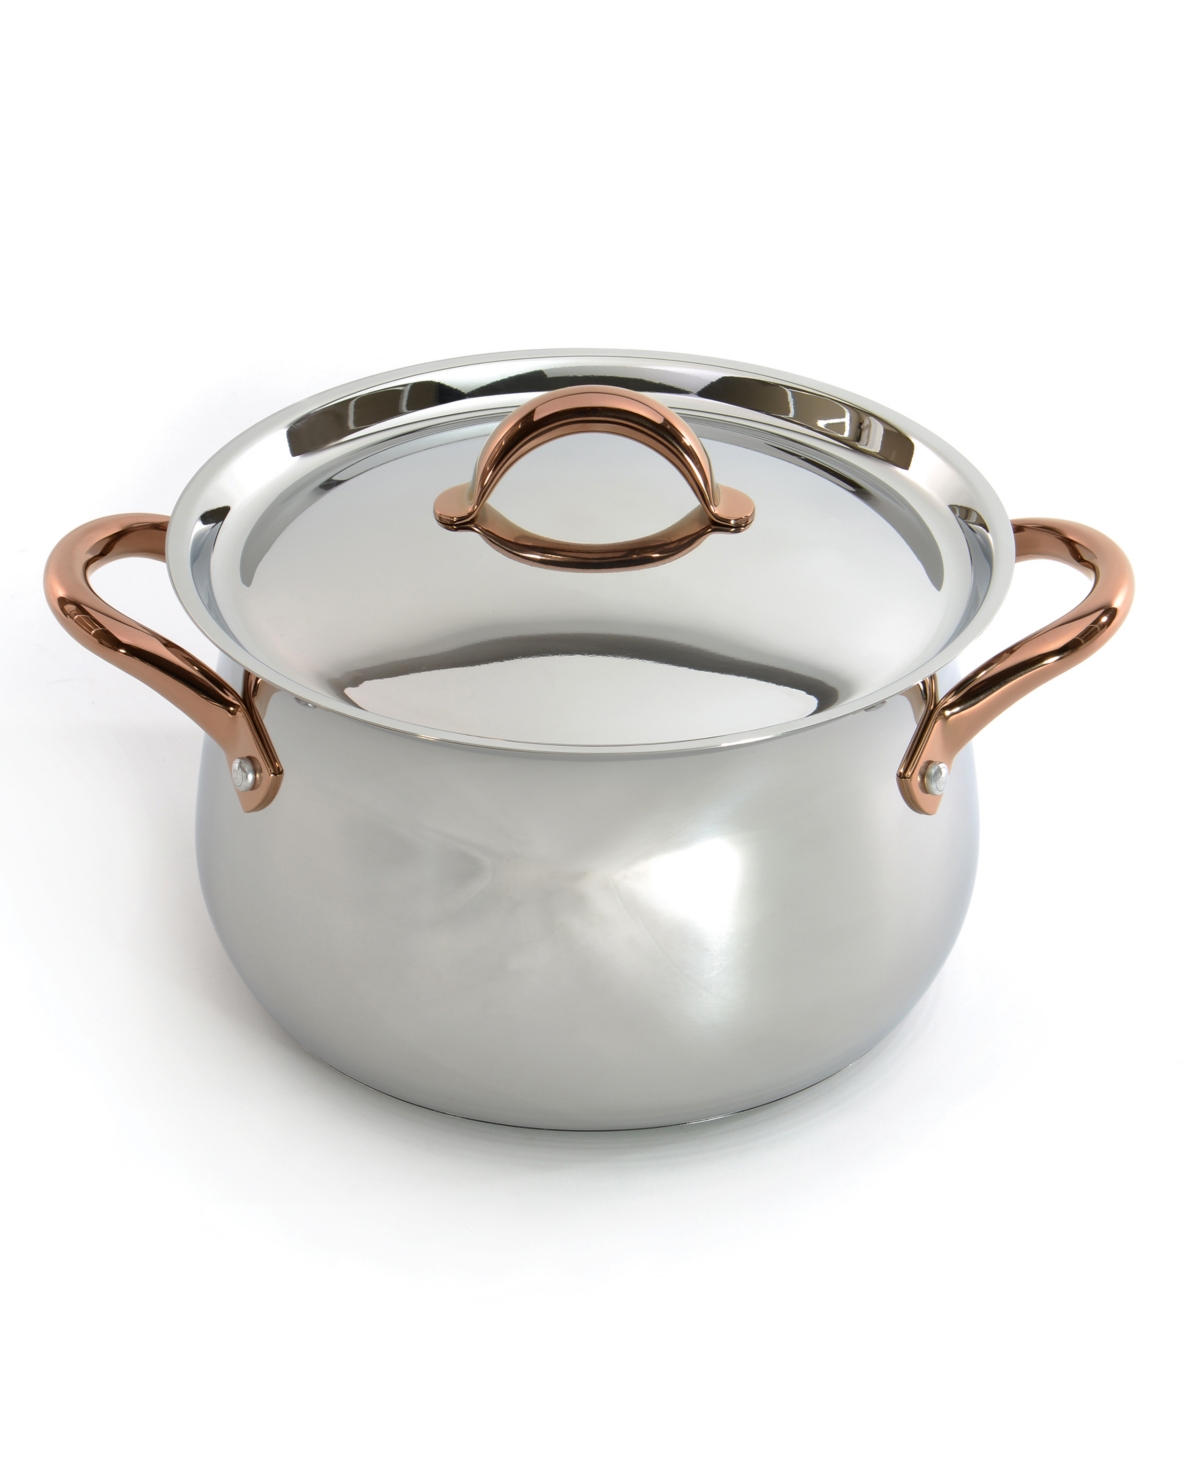 Ouro Stainless Steel 9.5 Covered Dutch Oven